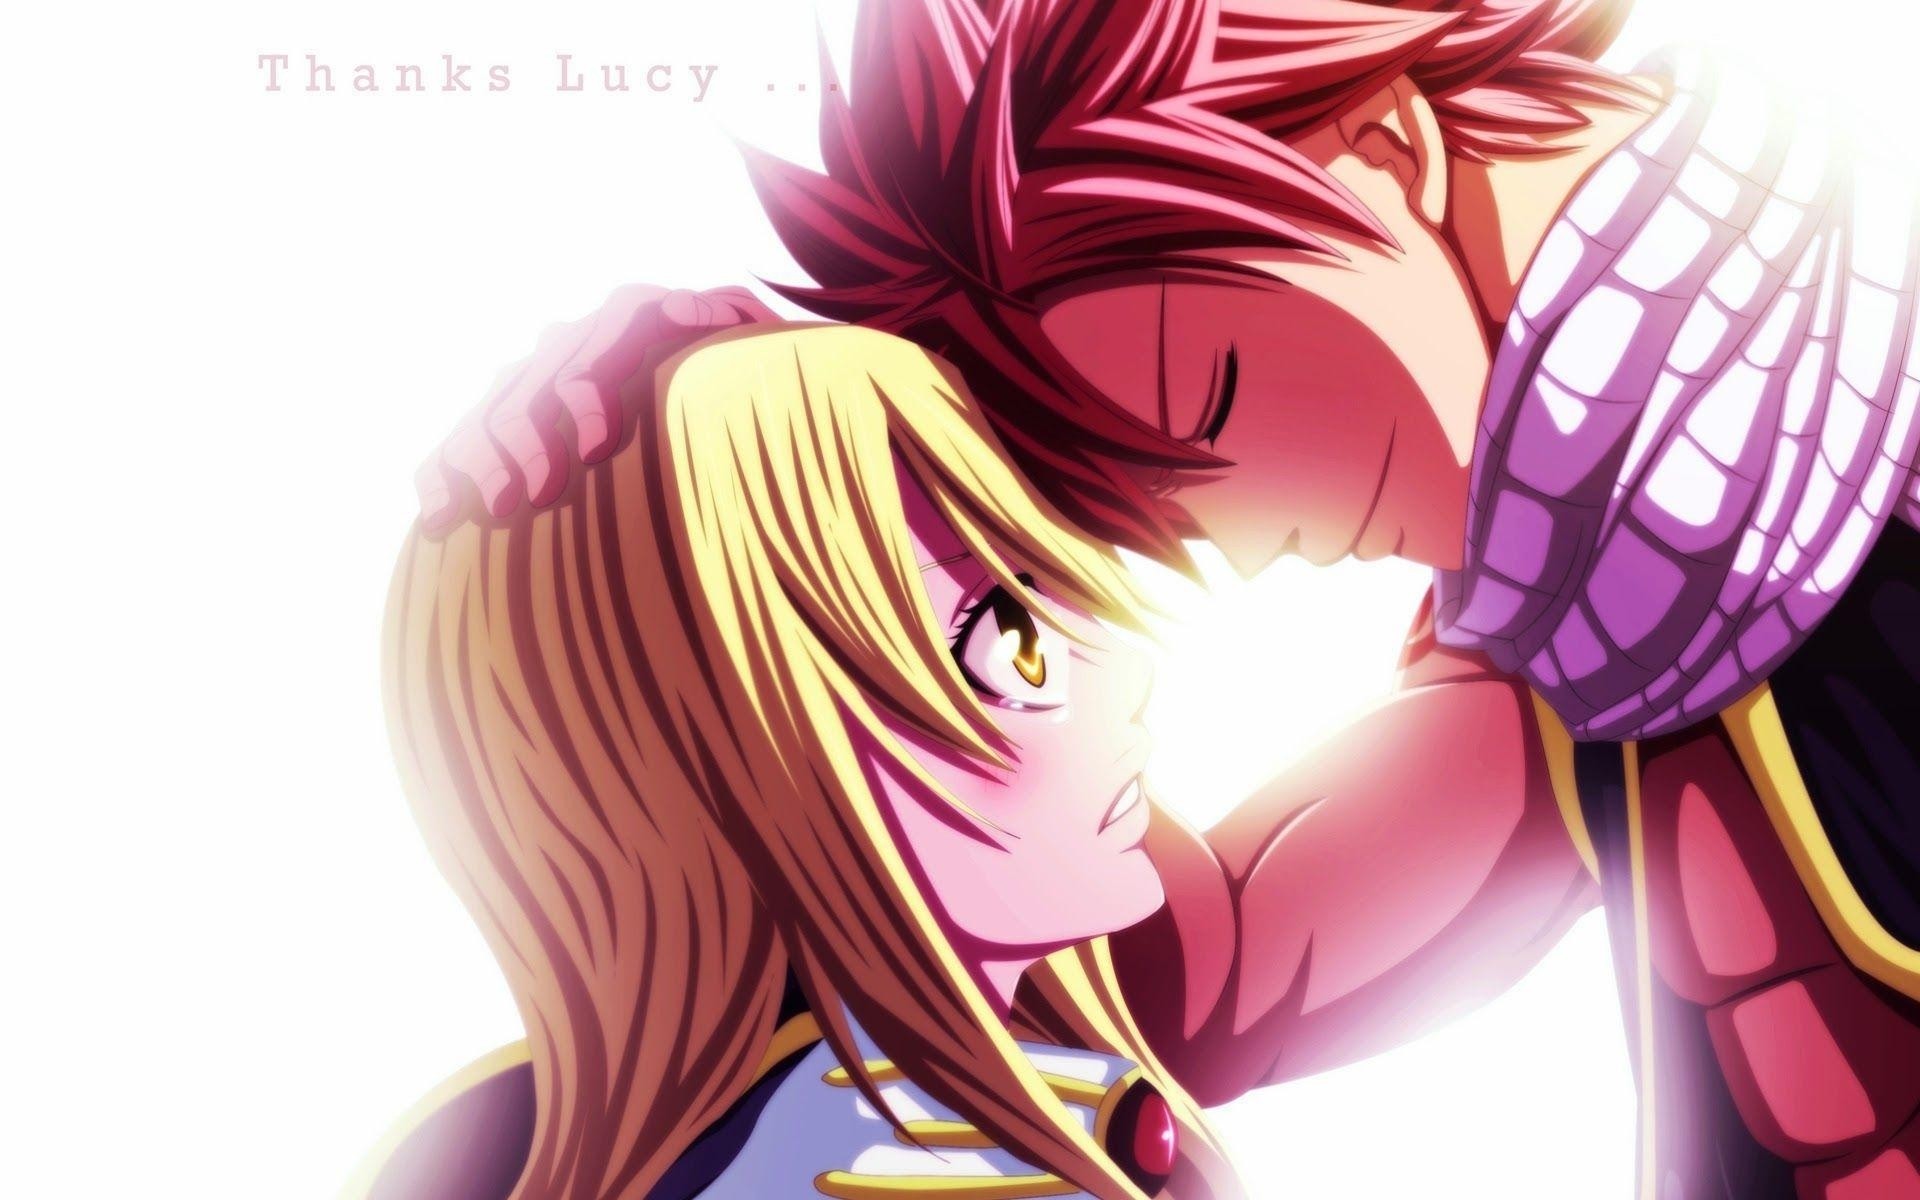 1920x1200 Title : natsu and lucy wallpapers – wallpaper cave. Dimension : 1920 x  1200. File Type : JPG/JPEG